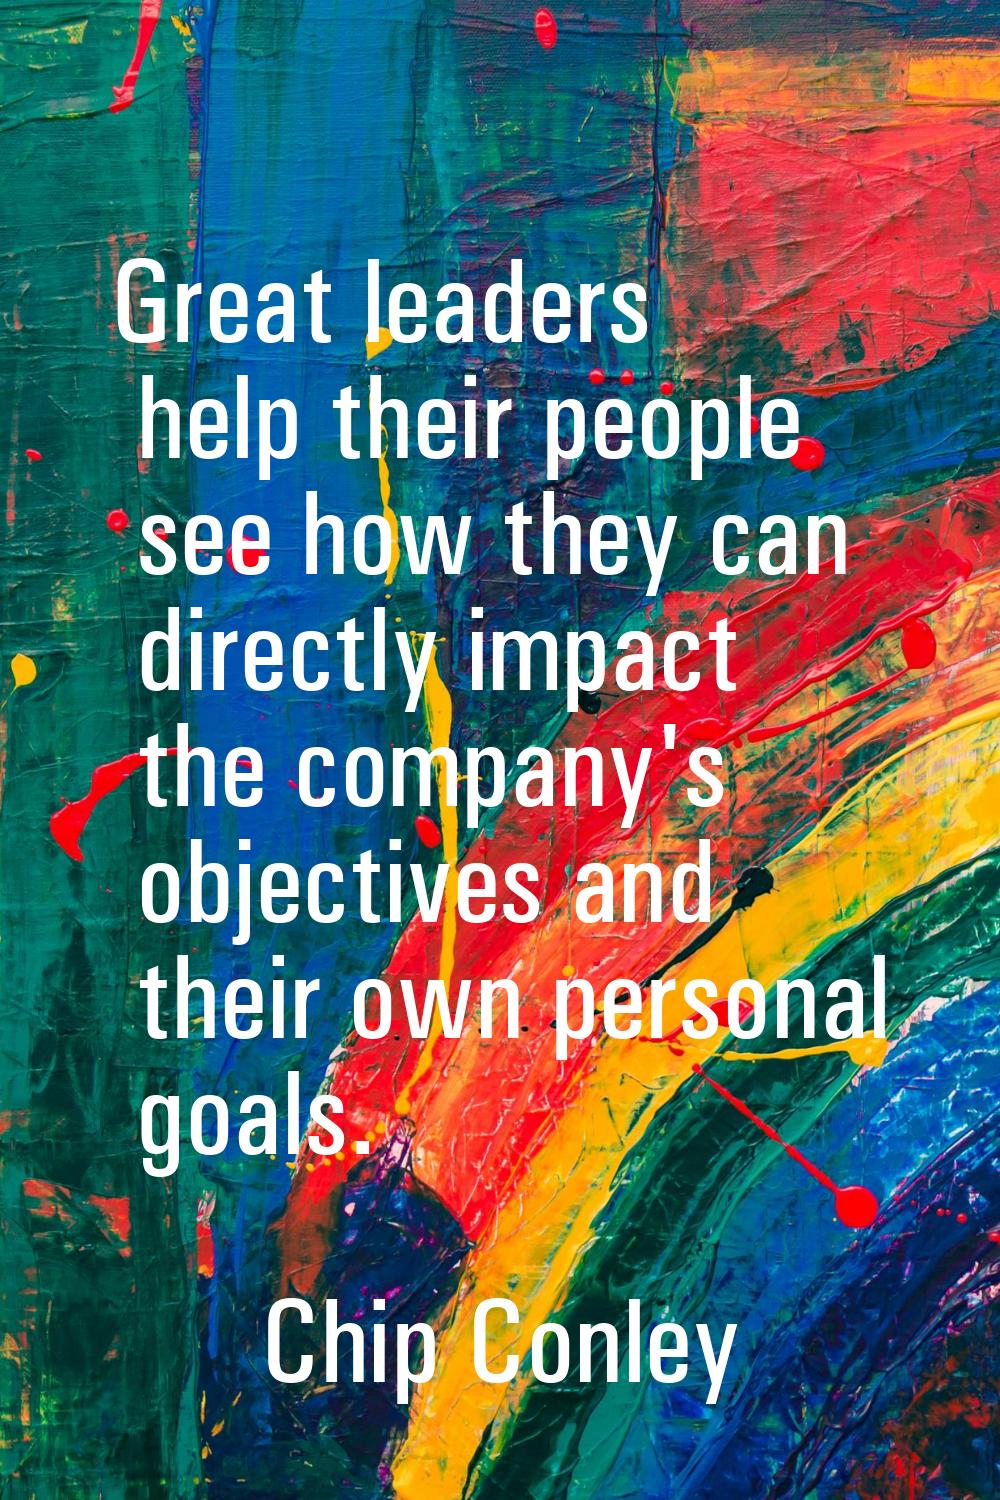 Great leaders help their people see how they can directly impact the company's objectives and their